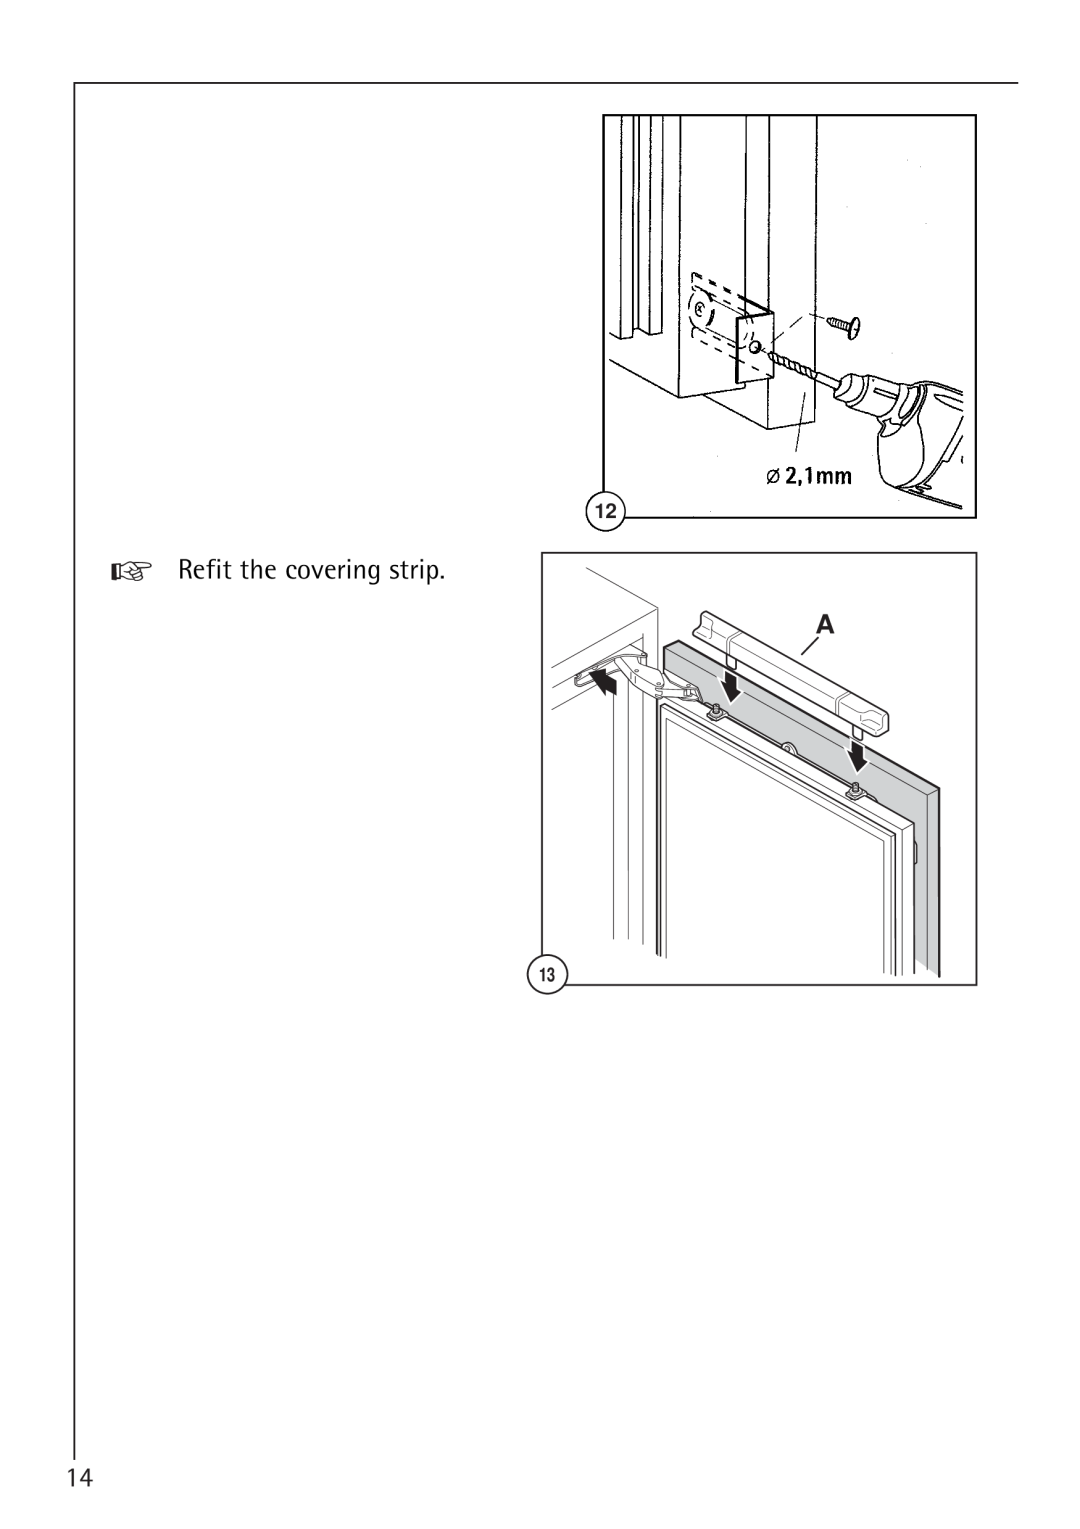 Electrolux 66050i installation instructions Refit the covering strip 